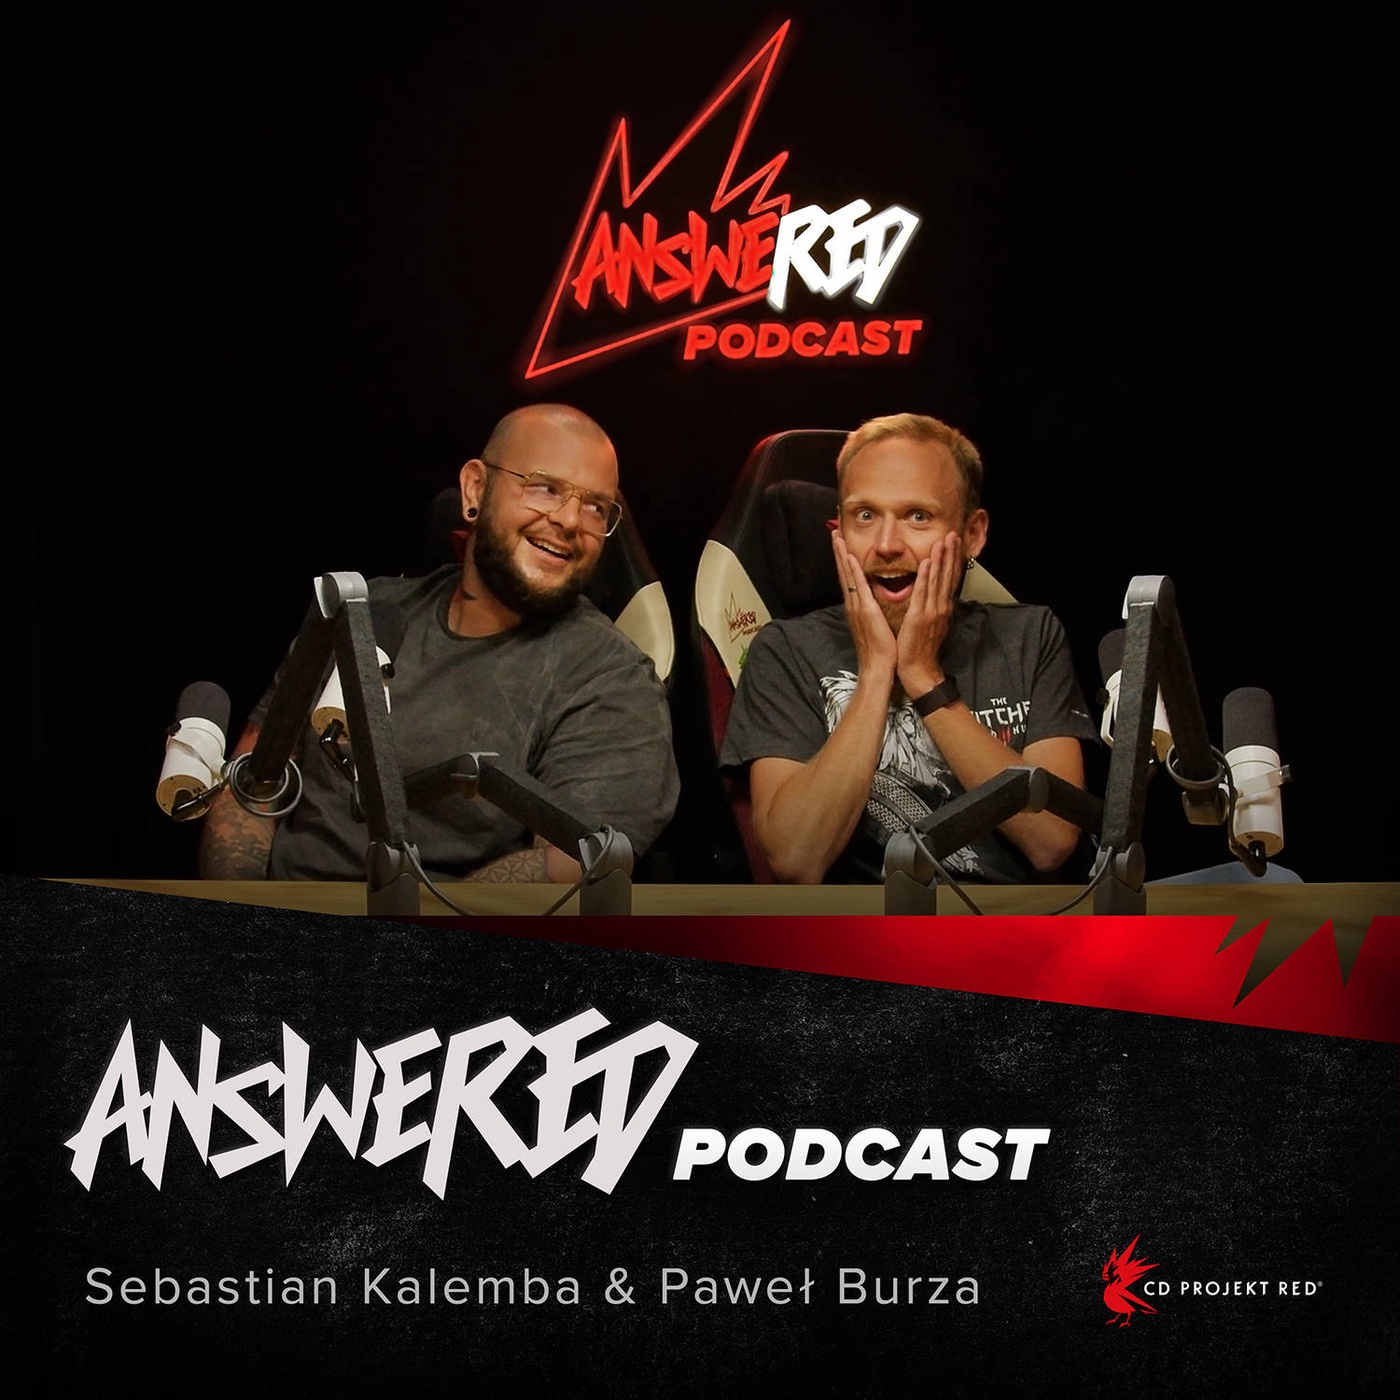 AnsweRED Podcast by CD PROJEKT RED